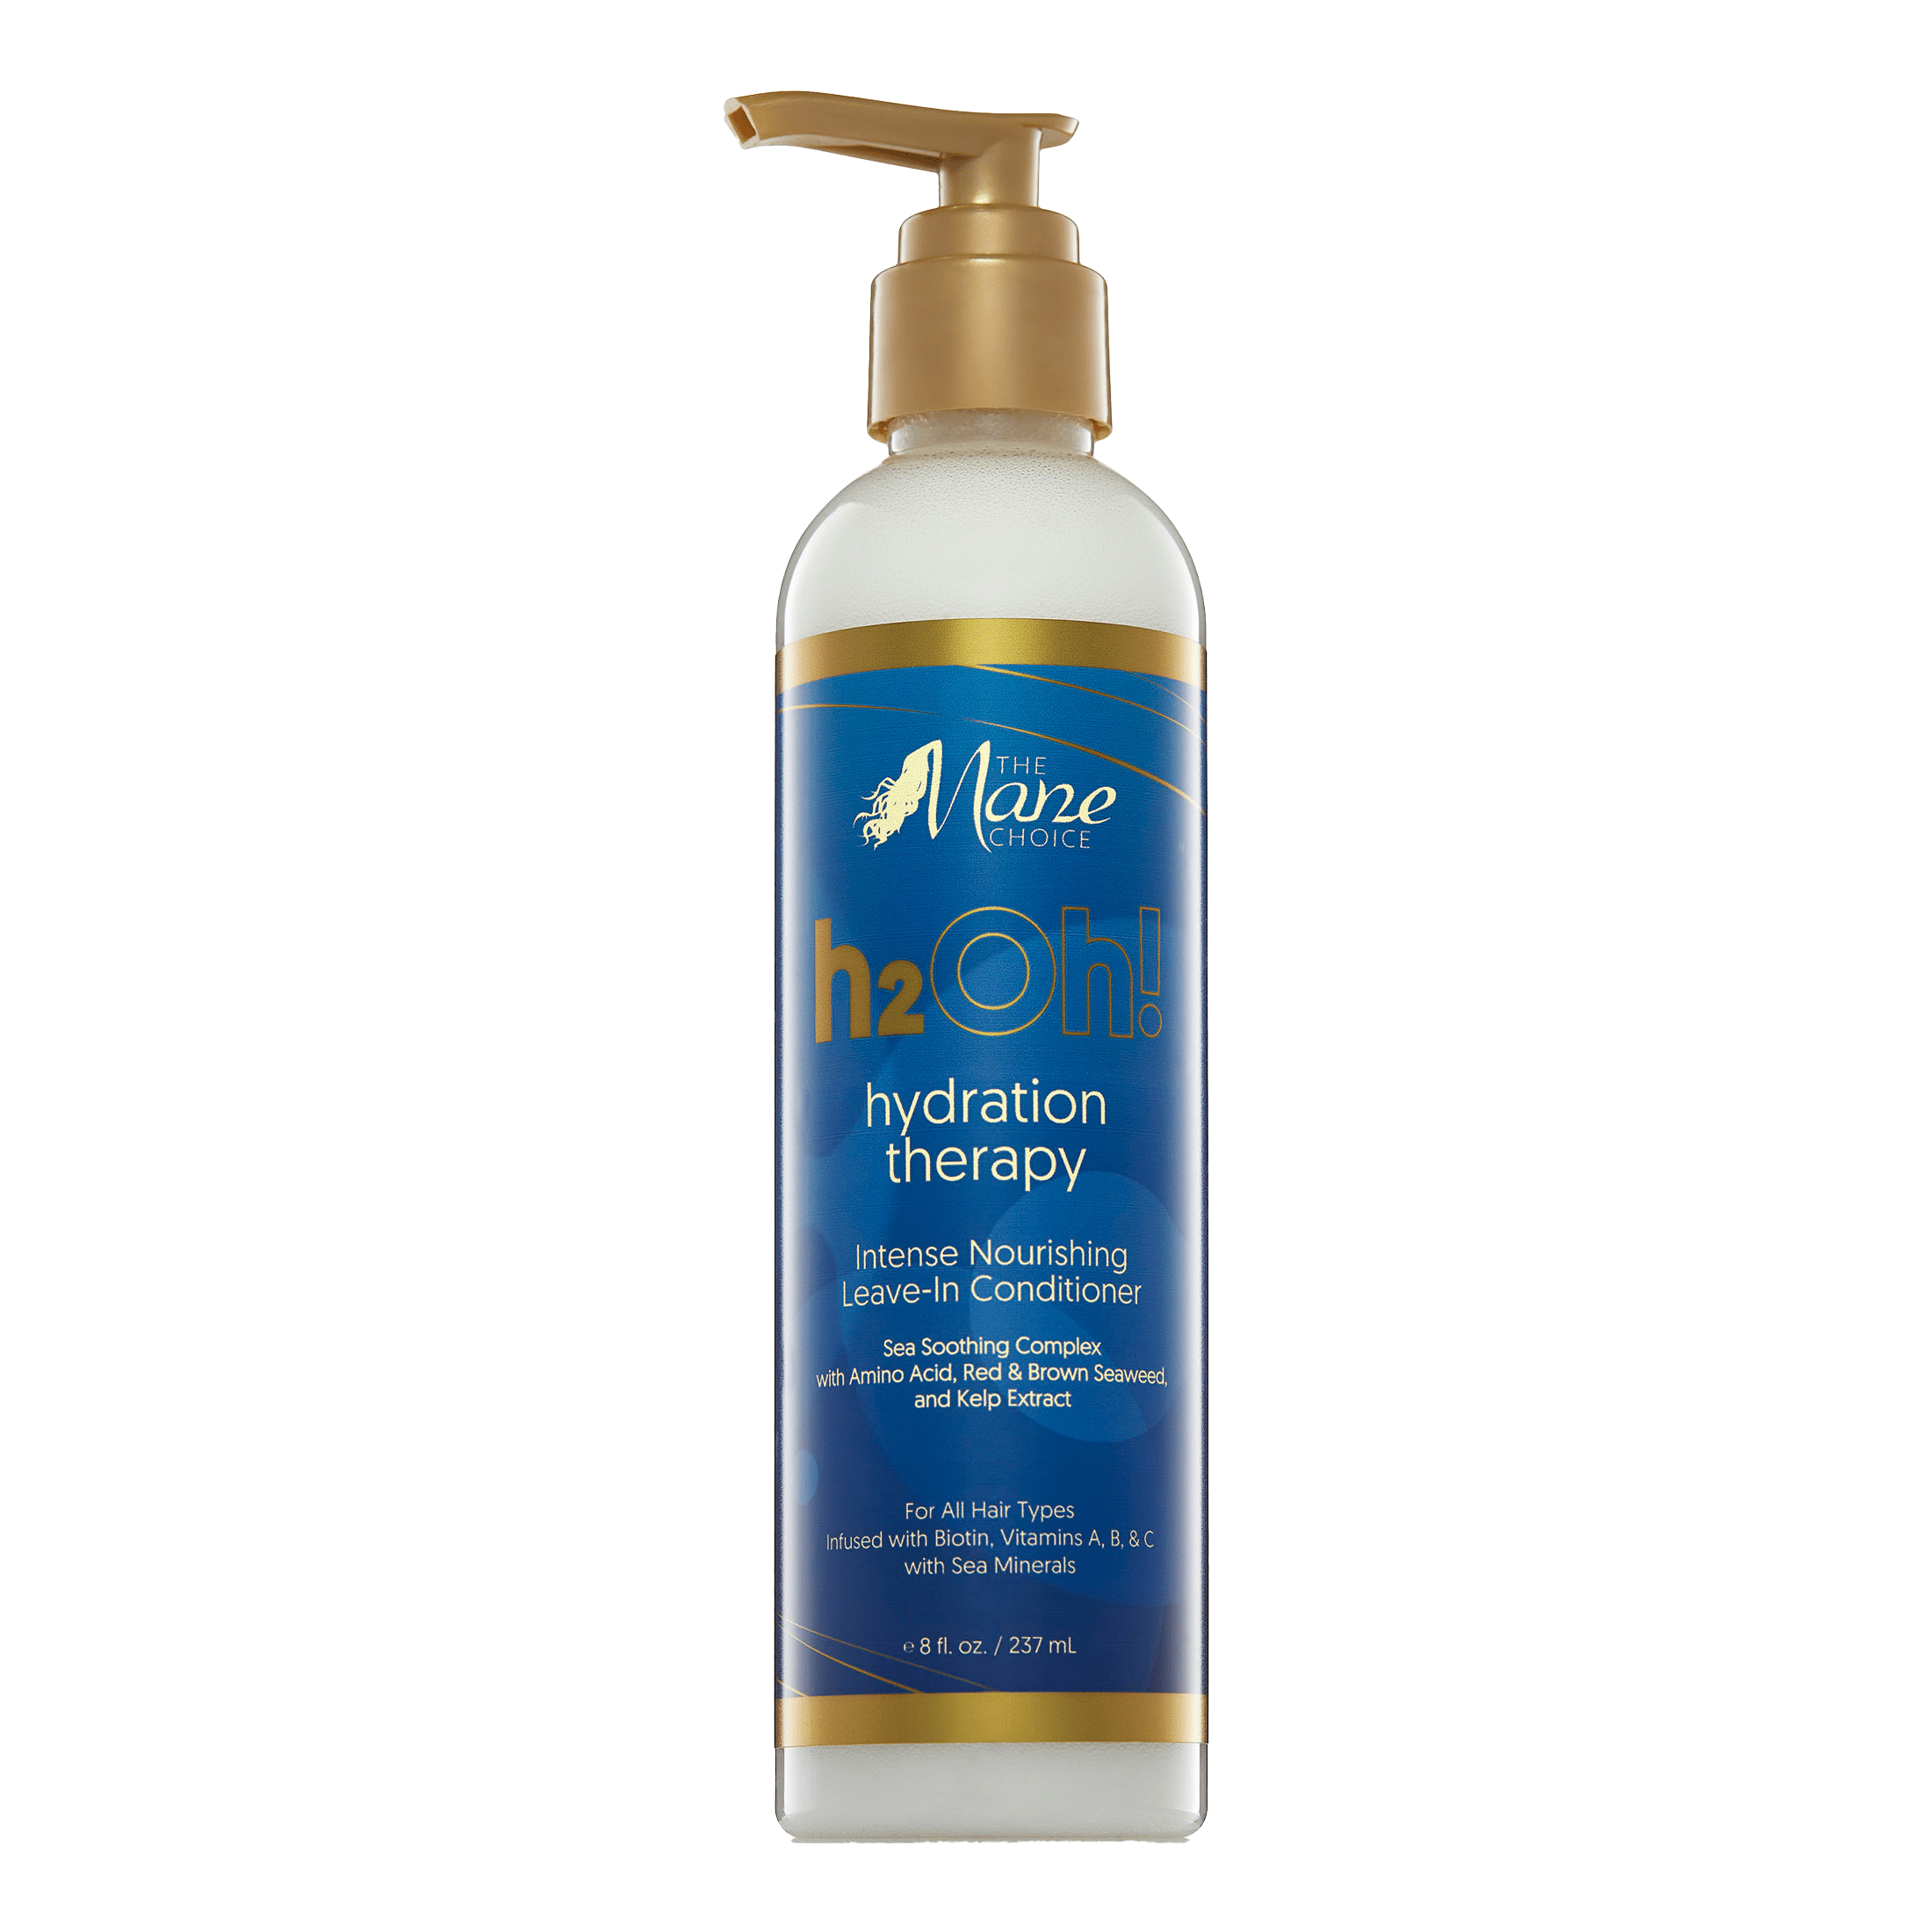 Àse BodyCare (ah-shay) Leave In Conditioner – DivercityHair Network